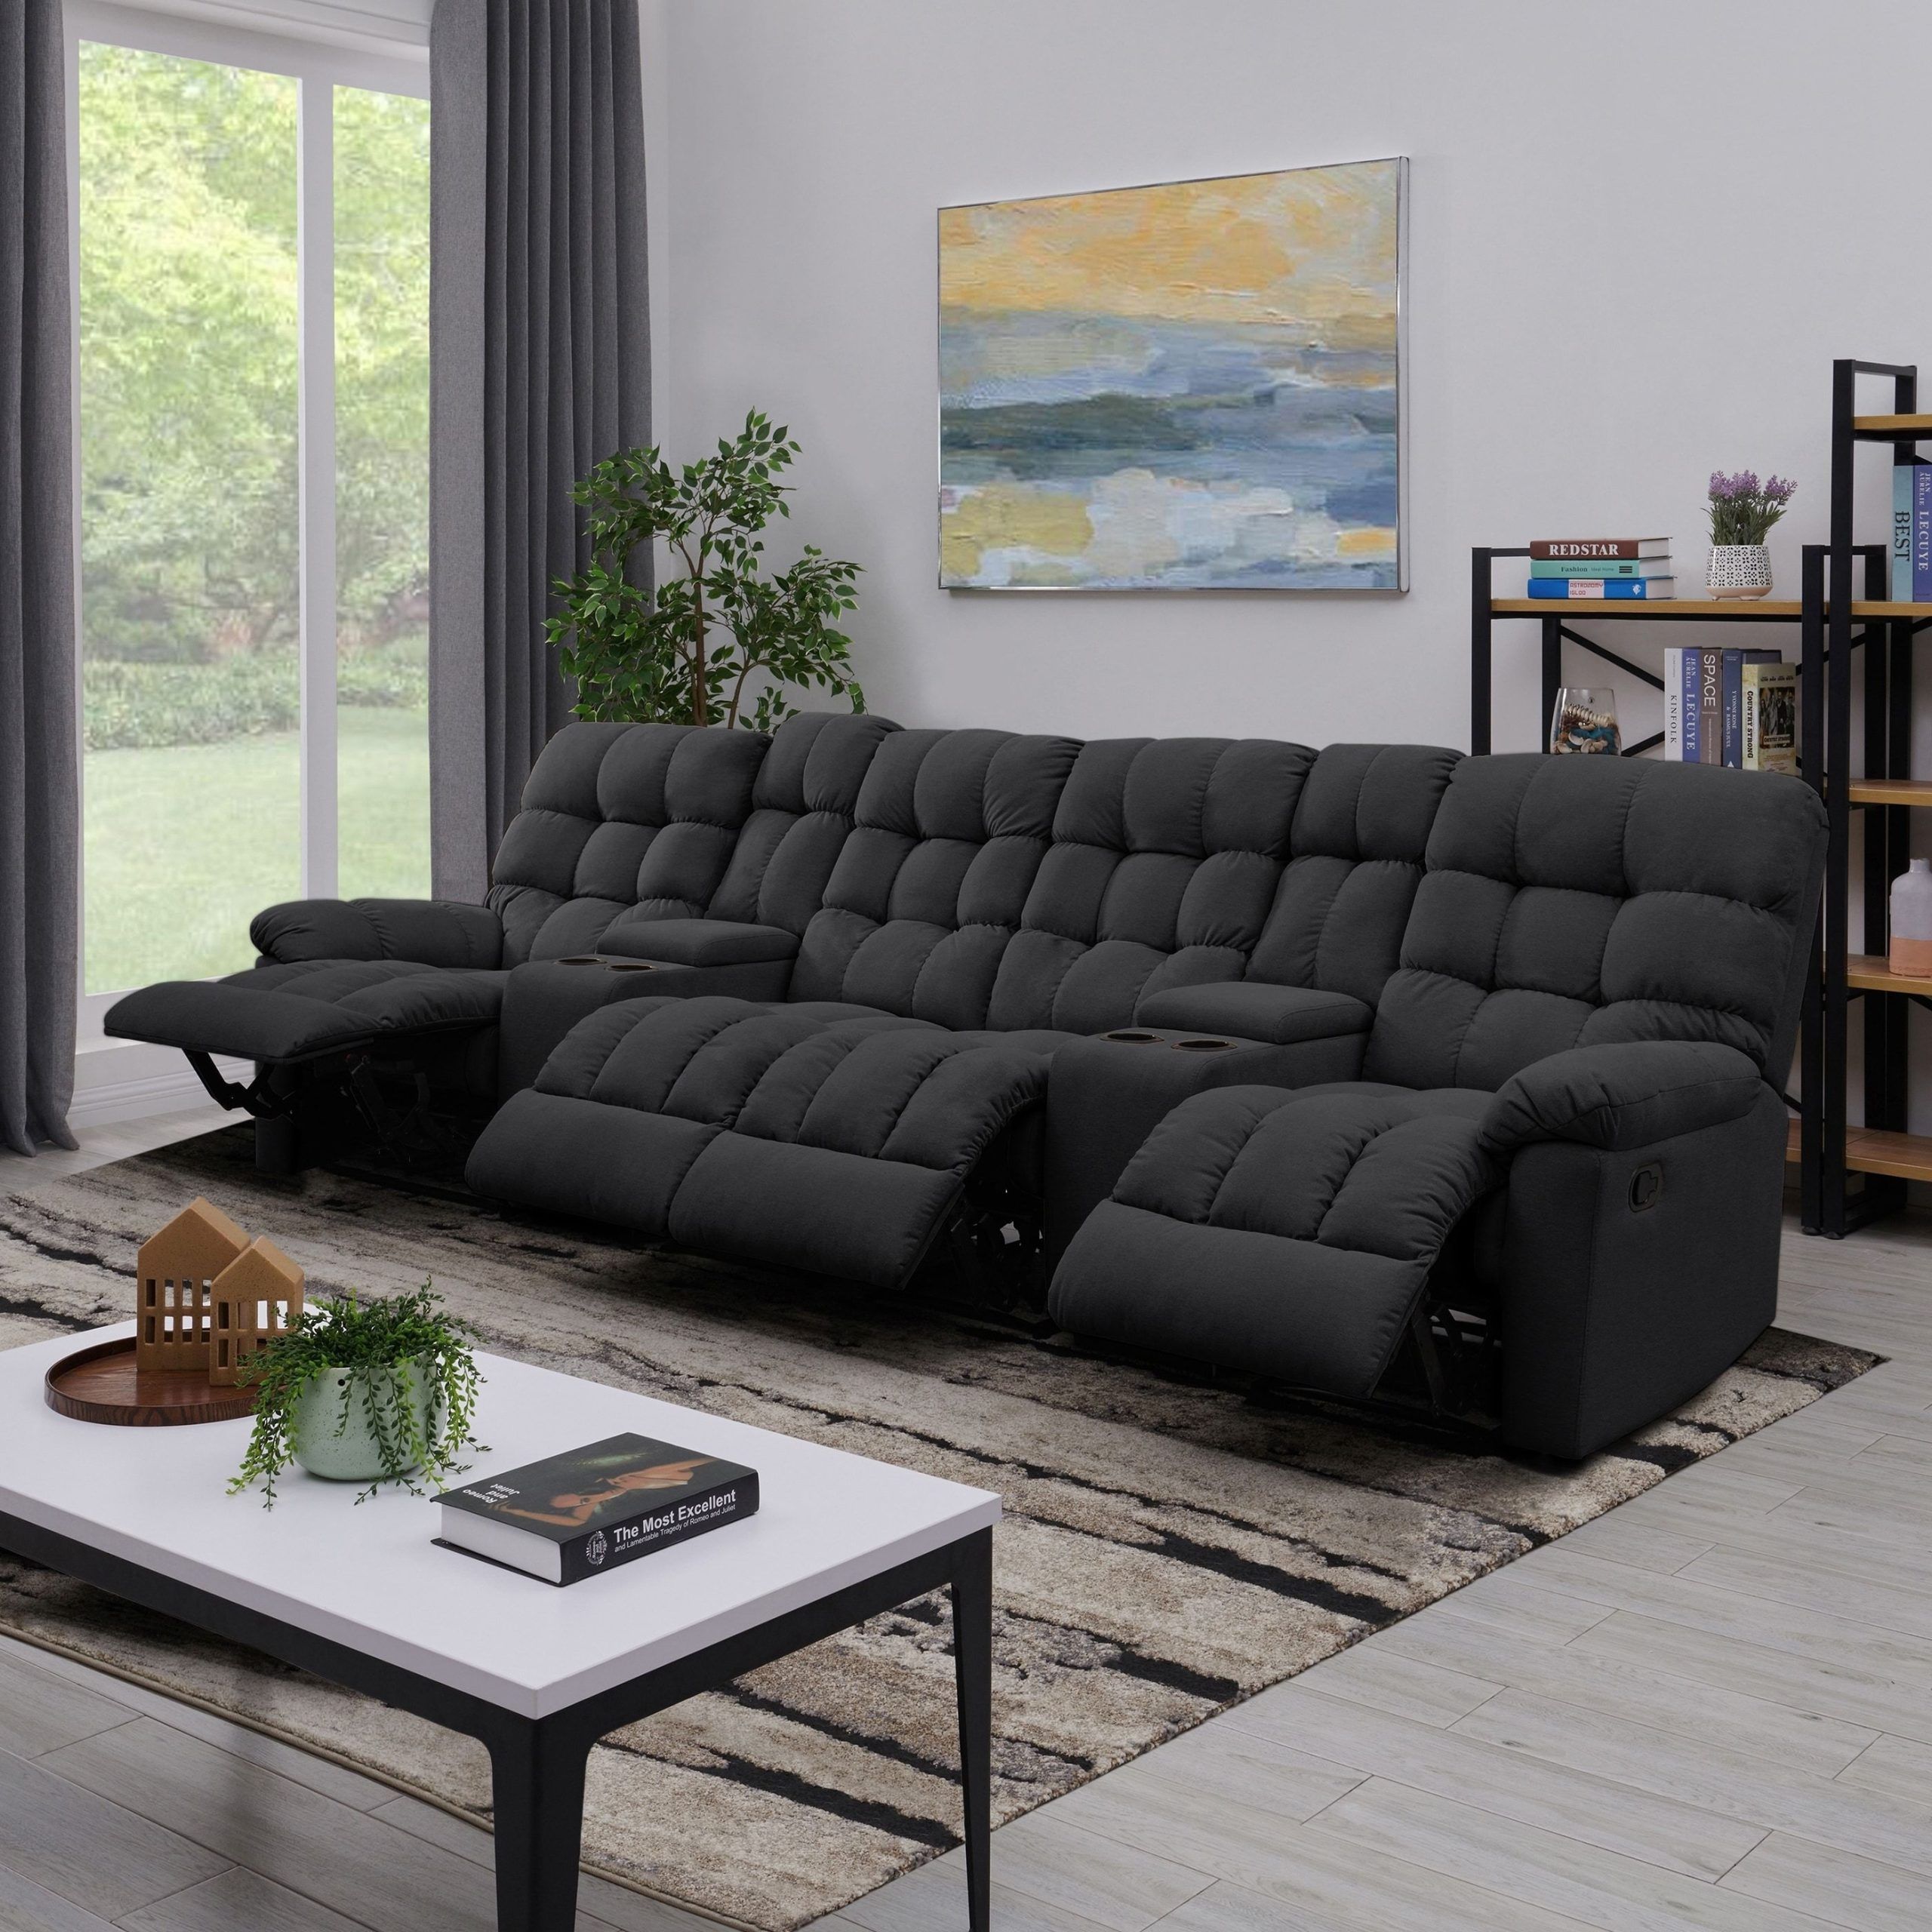 Featured Photo of 20 Best Collection of Modern Velvet Sofa Recliners with Storage